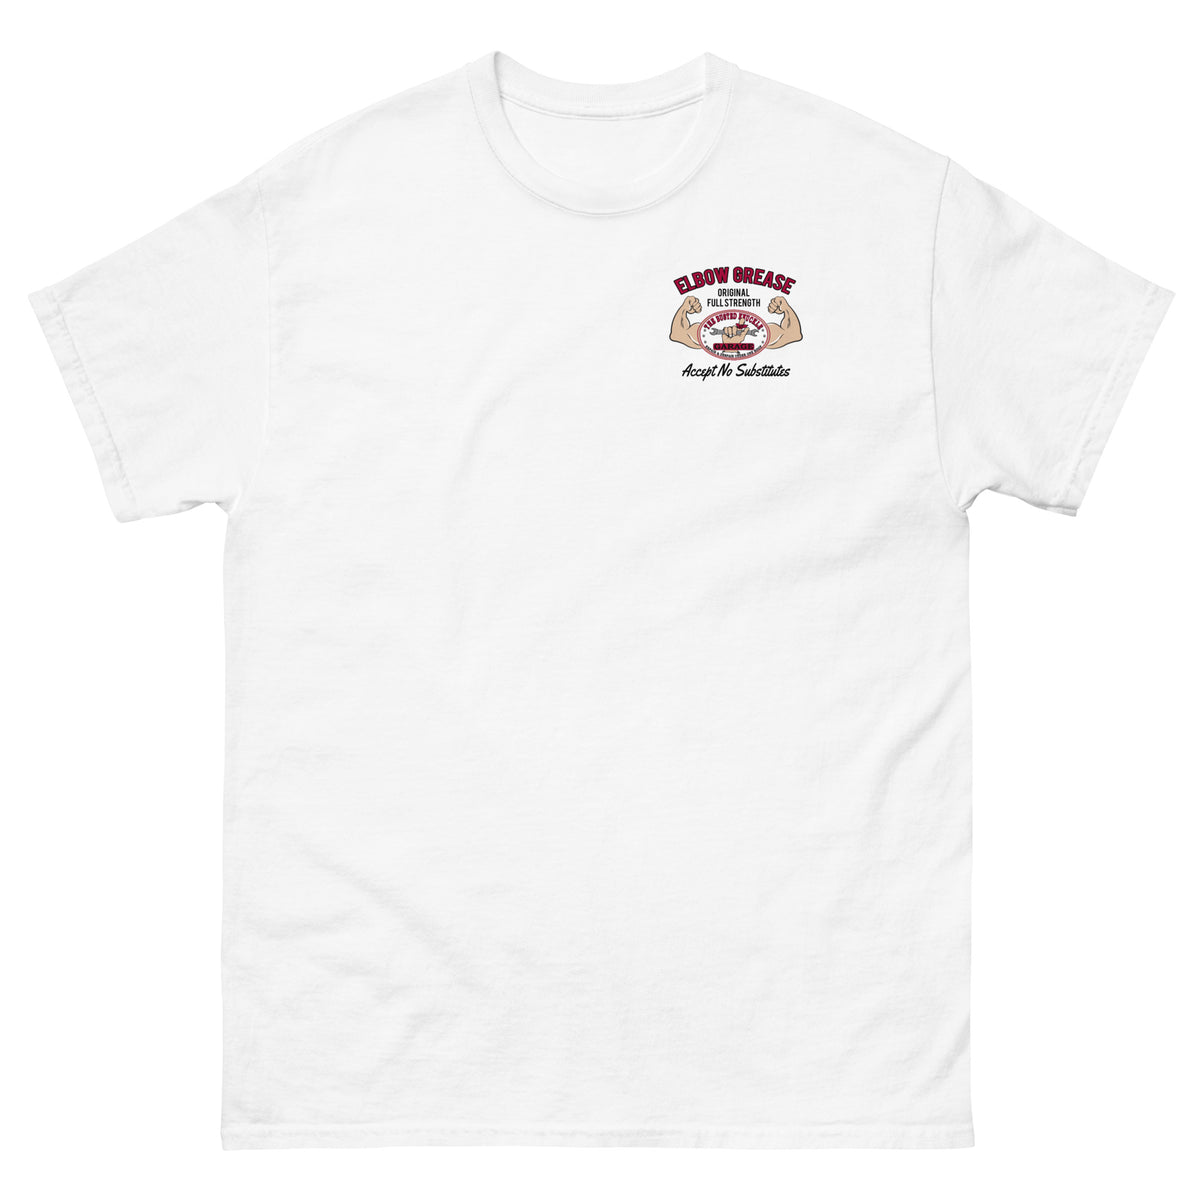 Busted Knuckle Garage Elbow Grease Two-Sided Carguy T-Shirt